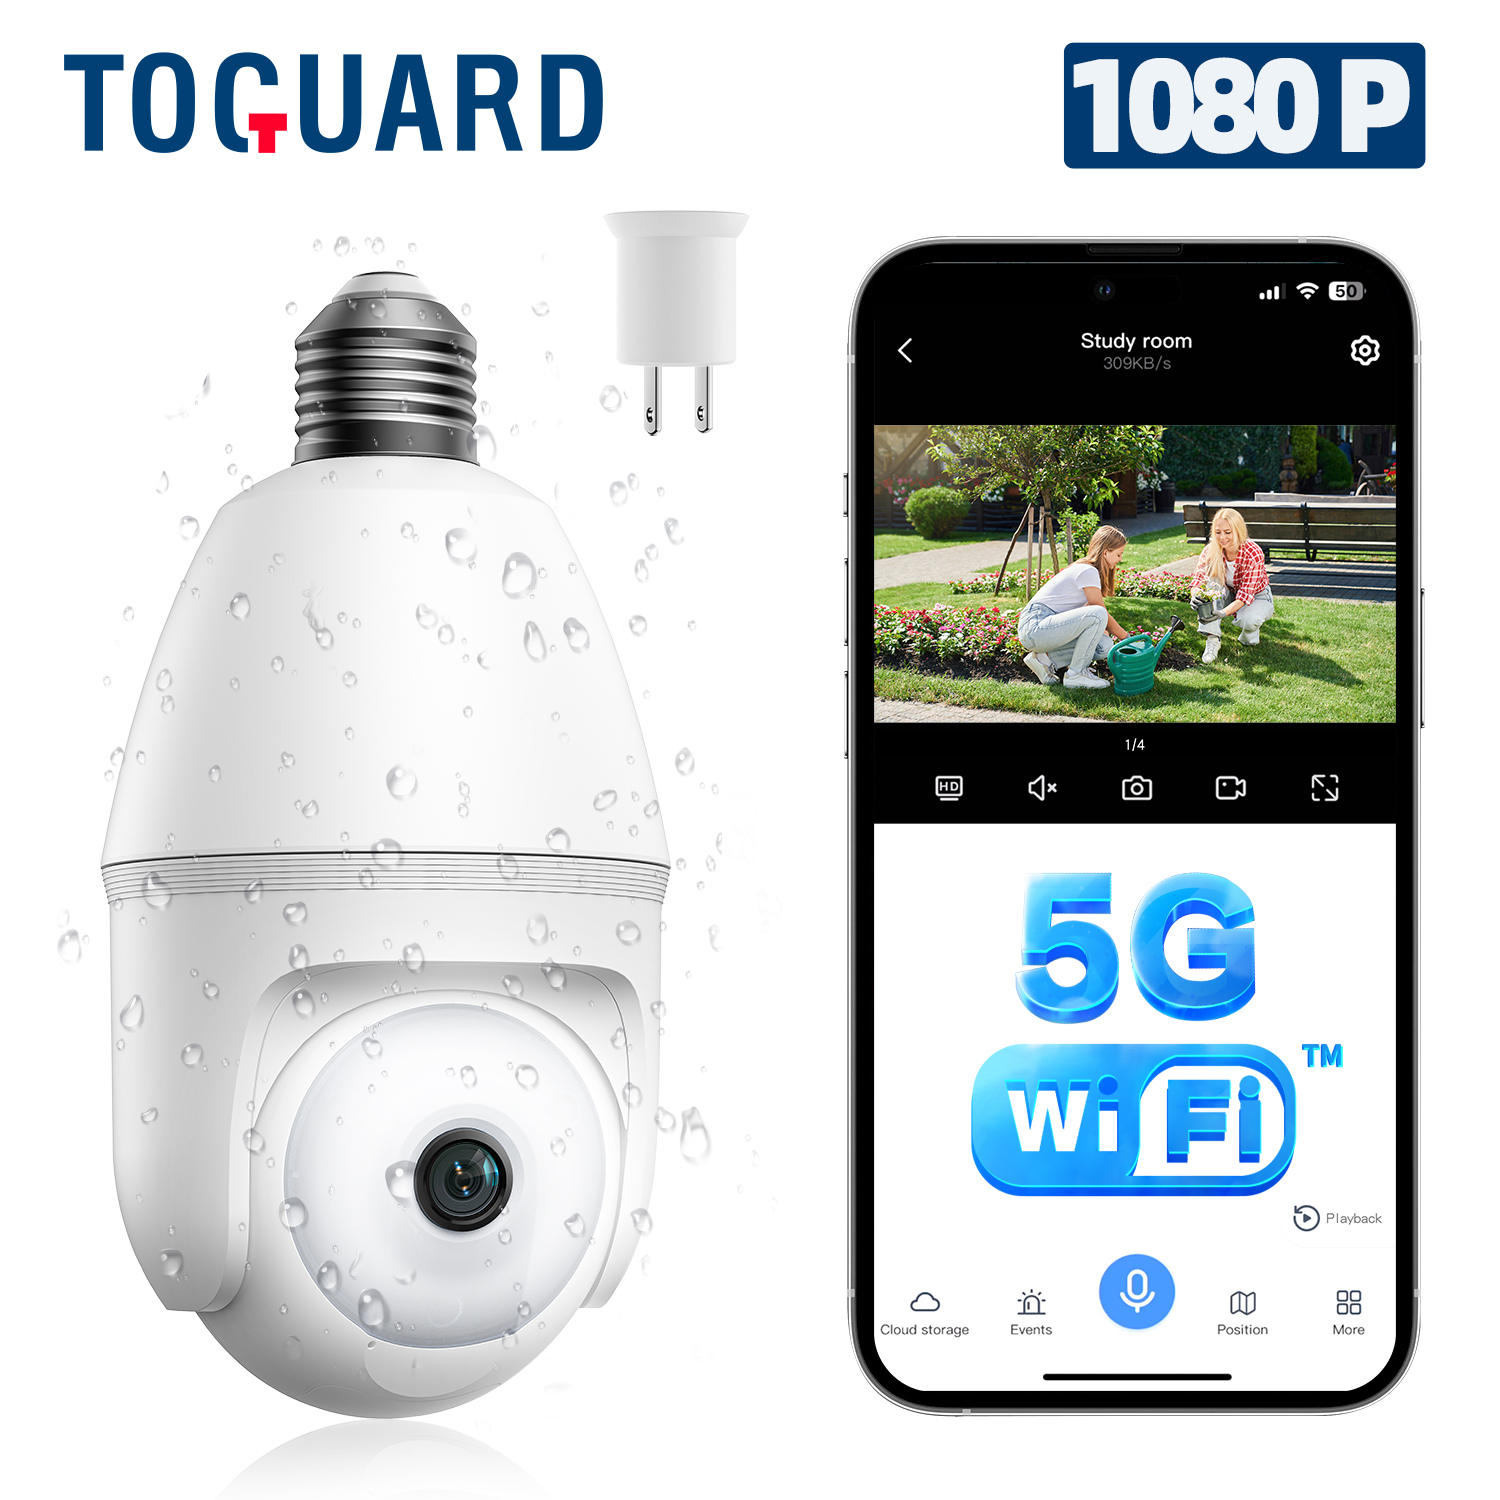 Toguard SC11 10X Hybrid Zoom Light Bulb Security Camera Outdoor E27 PTZ Dual Lens Wireless Wi-Fi Dome Surveillance Camera (Supports Only 2.4GHz Wi-Fi) - image 1 of 9